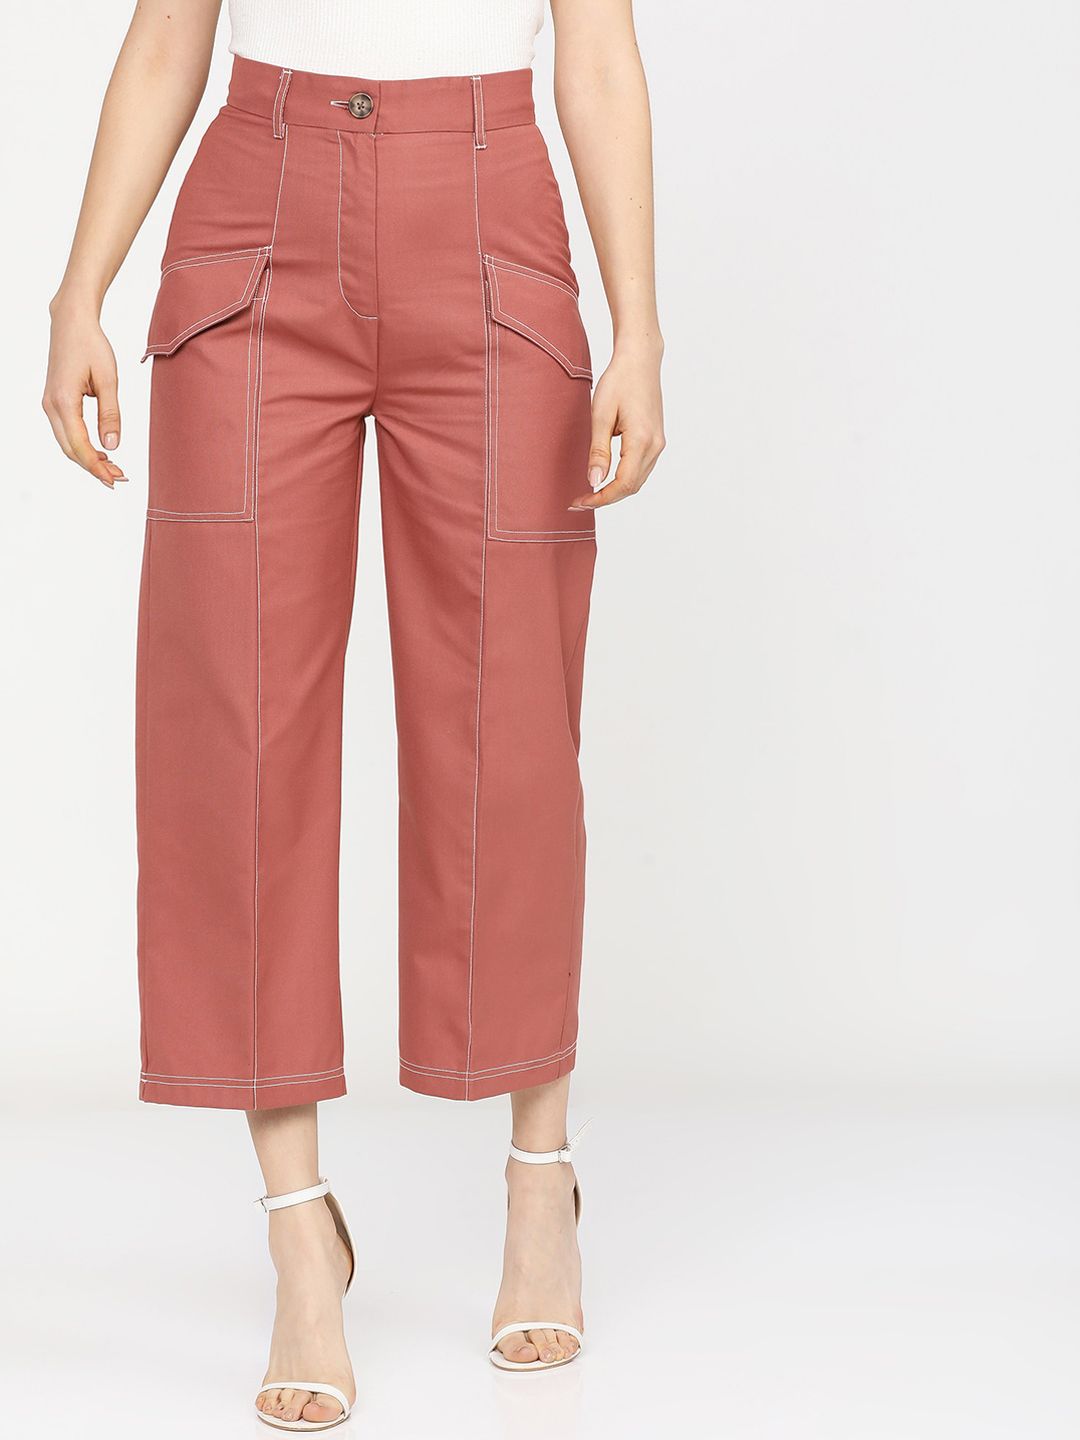 Tokyo Talkies Women Rust Straight Fit Pleated Culottes Trousers Price in India